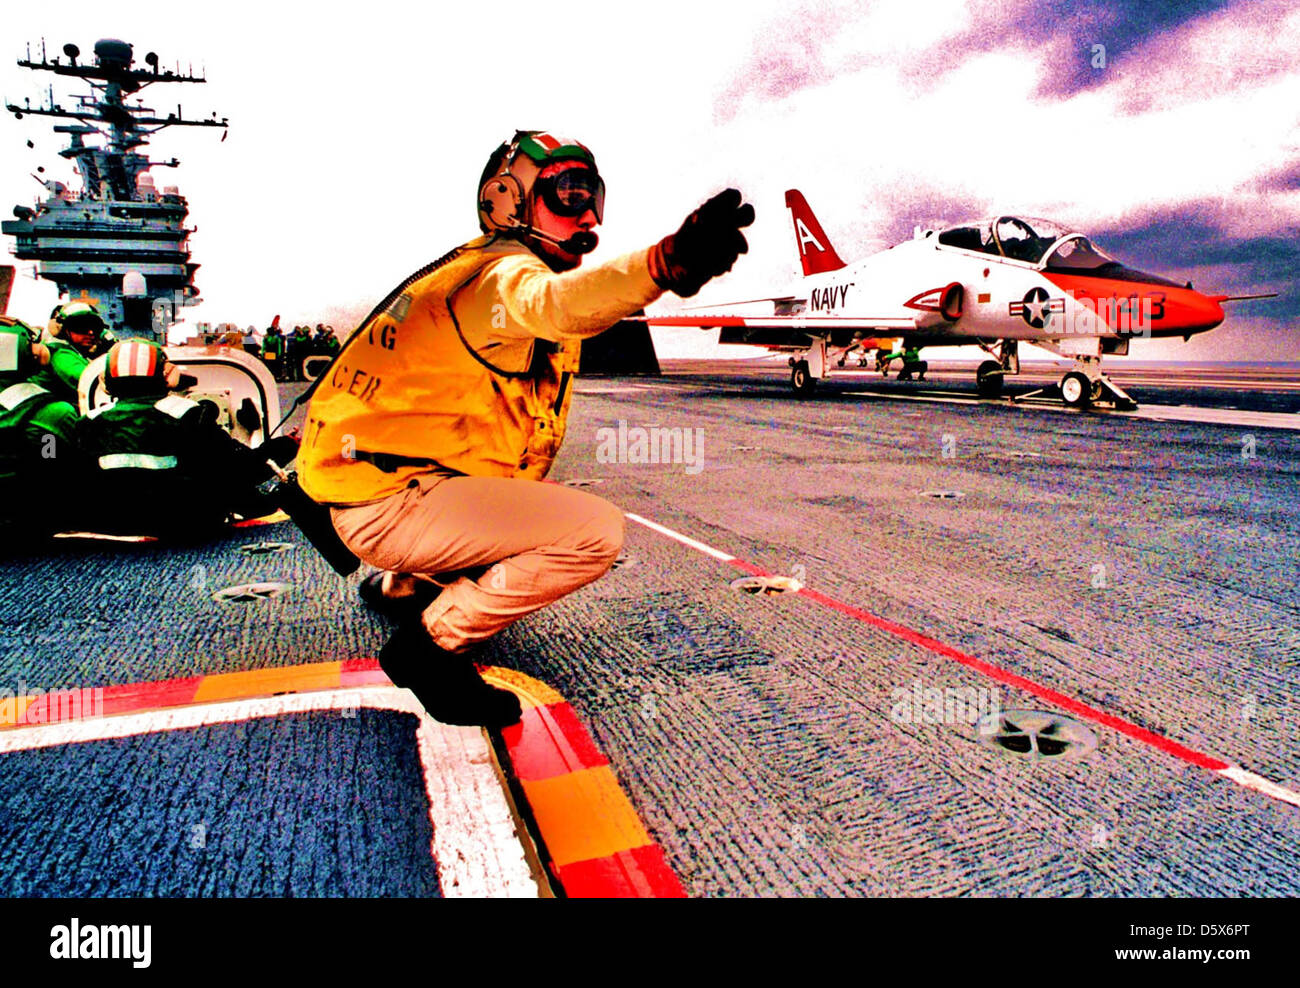 US Navy (USN) Lieutenant Commander (LCDR) Sherman Scott, a Aircraft Handling Officer, gives the launch signal to a USN T-45A Goshawk aircraft from Training Squadron Seven (VT-7), as the aircraft prepares to launch, during final qualifications aboard the USN Aircraft Carrier USS GEORGE WASHINGTON (CVN-73). Stock Photo